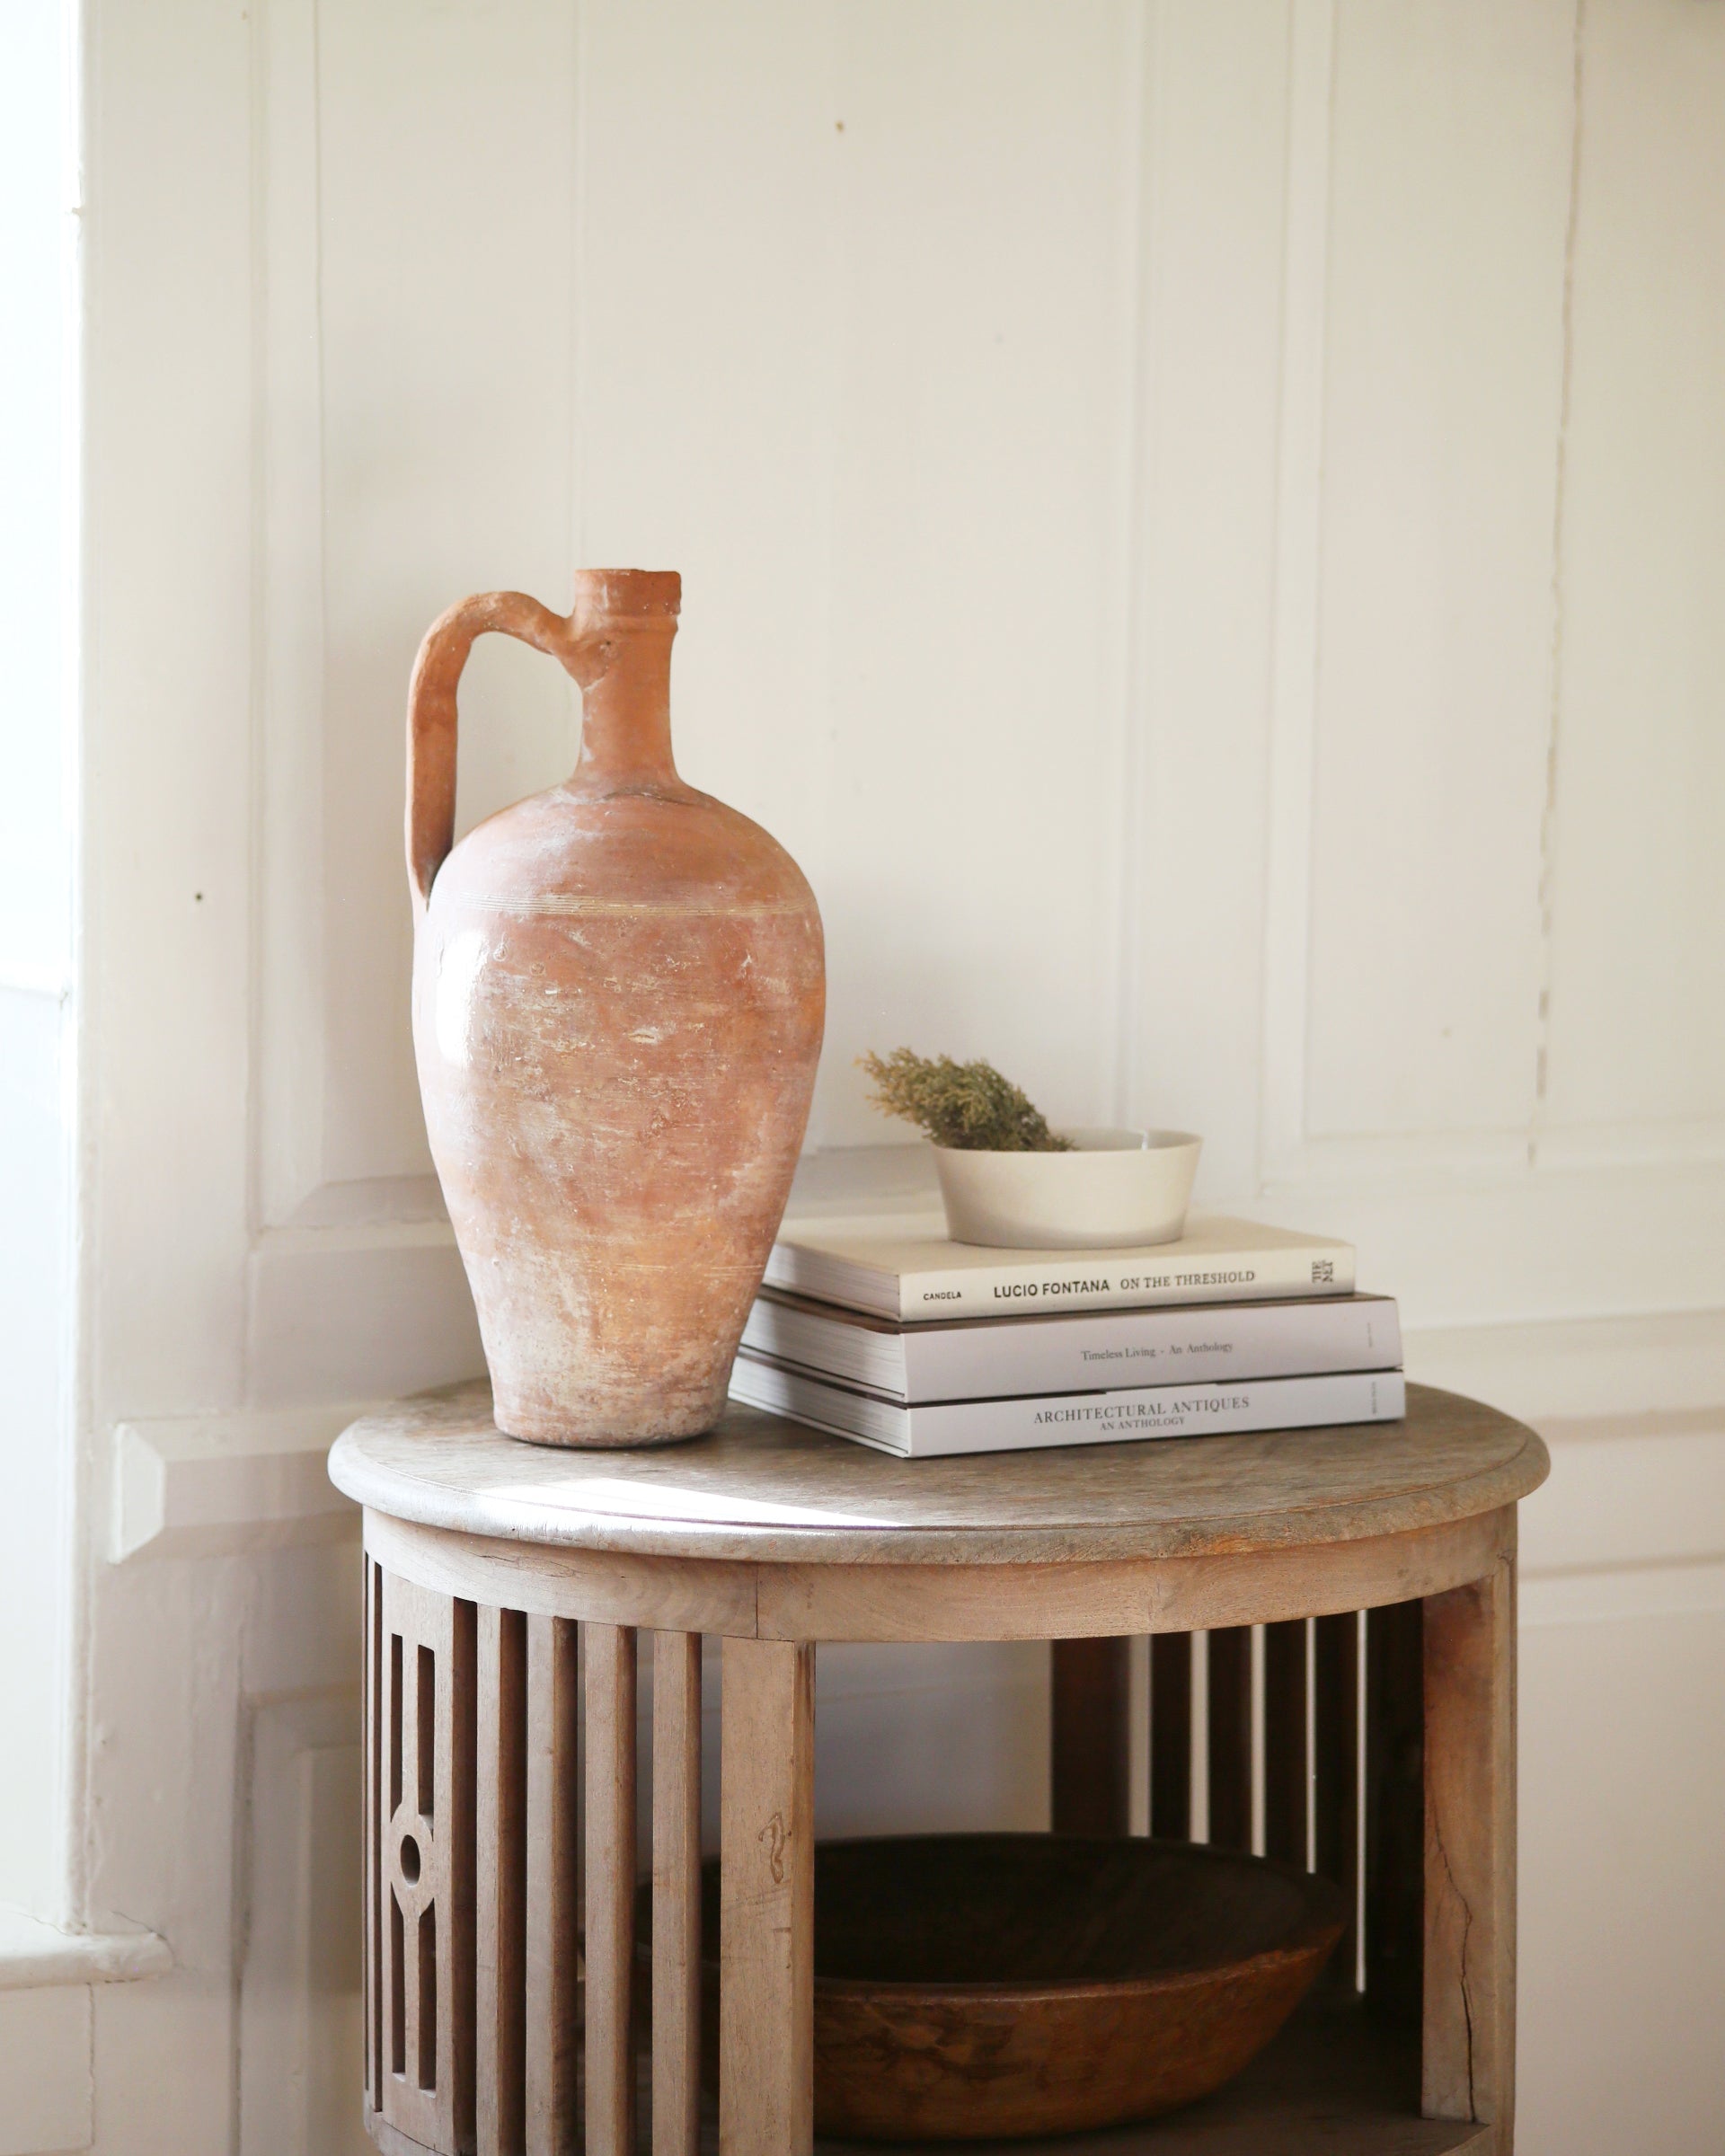 Occasional table with antique pottery